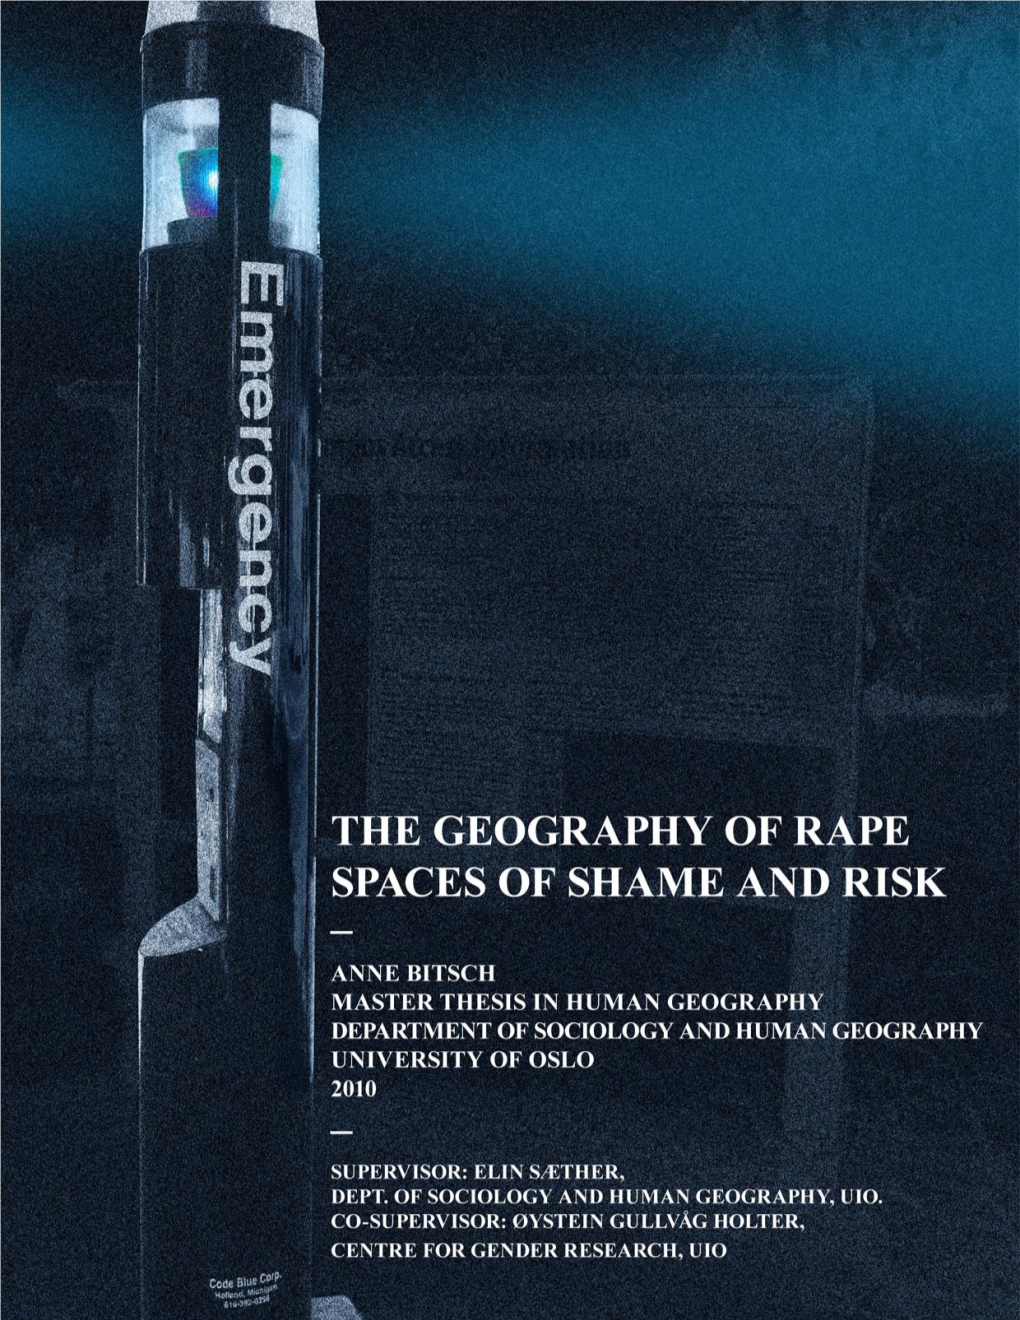 Investigating the Geography of Rape